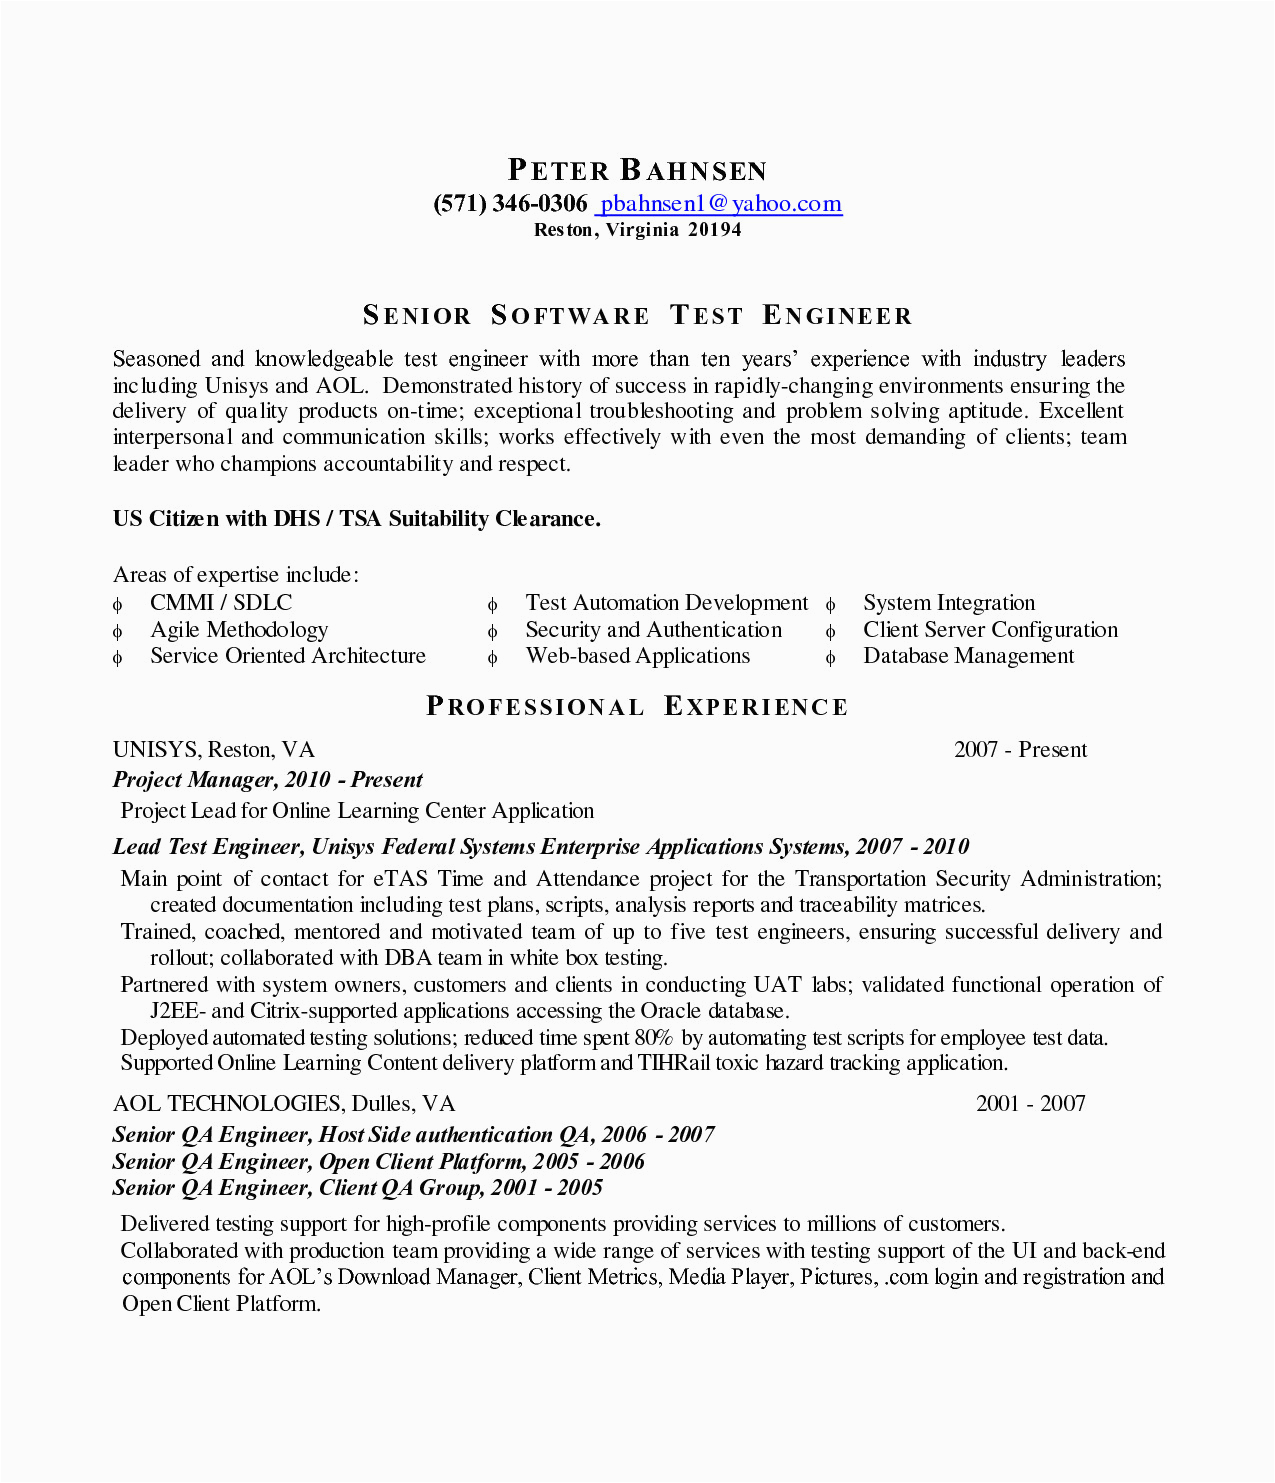 Sample Resume for Experienced software Test Engineer Download Sample Resume for software Test Engineer with Experience